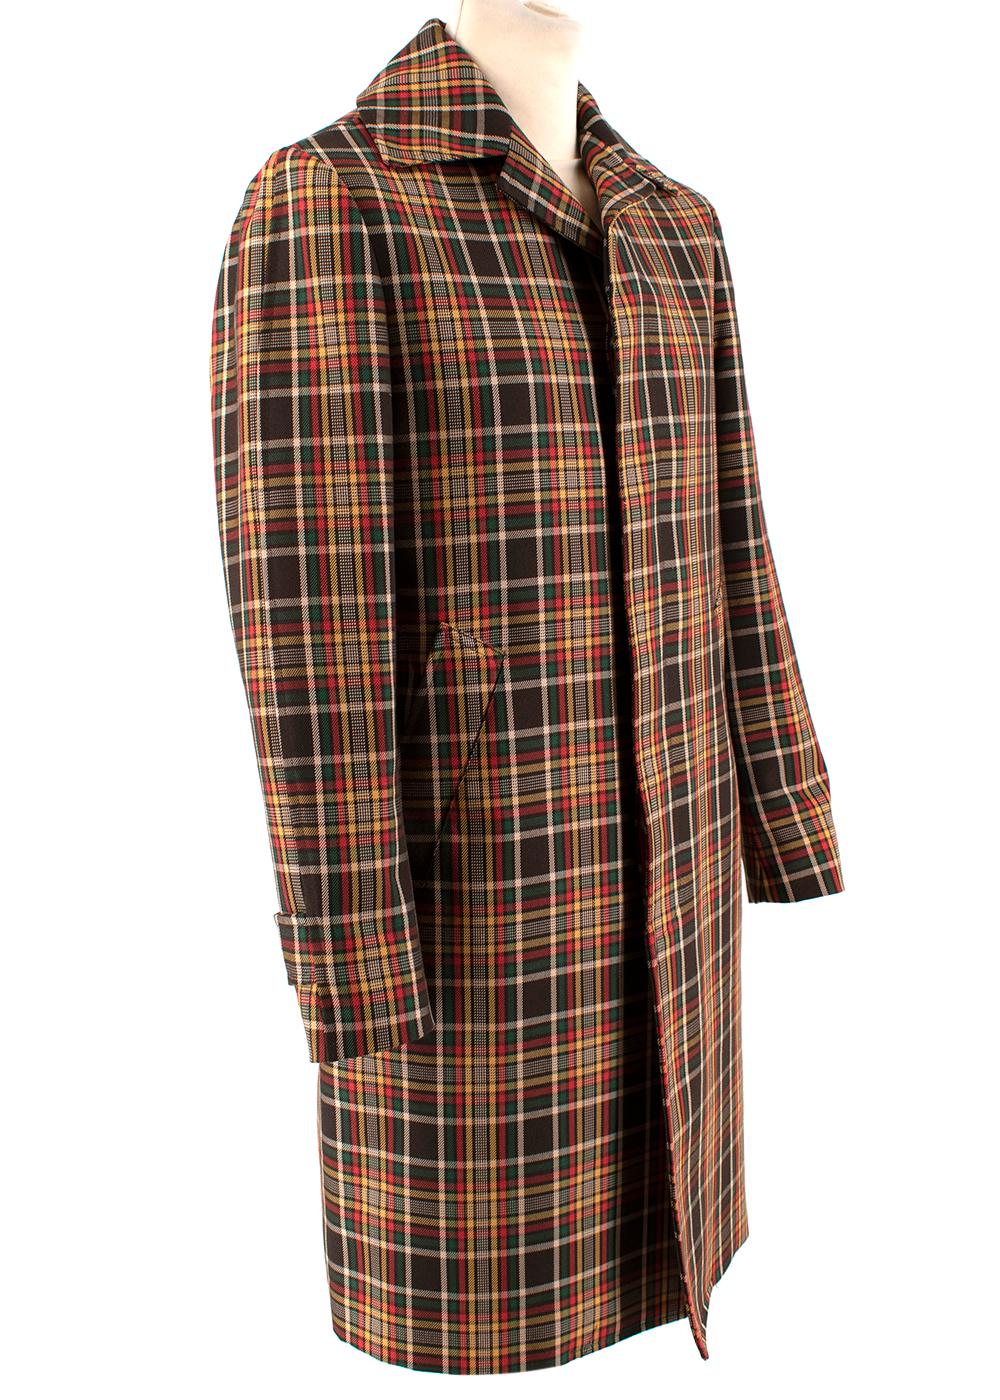 Bottega Martinese Multi-Colour Check Coat 

- Button down front closure 
- Side slip pockets 
- Quilted red lining 
- Pointed collar 
- Button detail at cuffs 
- Light-weight

Materials 
53% Polyester 
47% Cotton 

Dry Clean Only 

Made in Italy